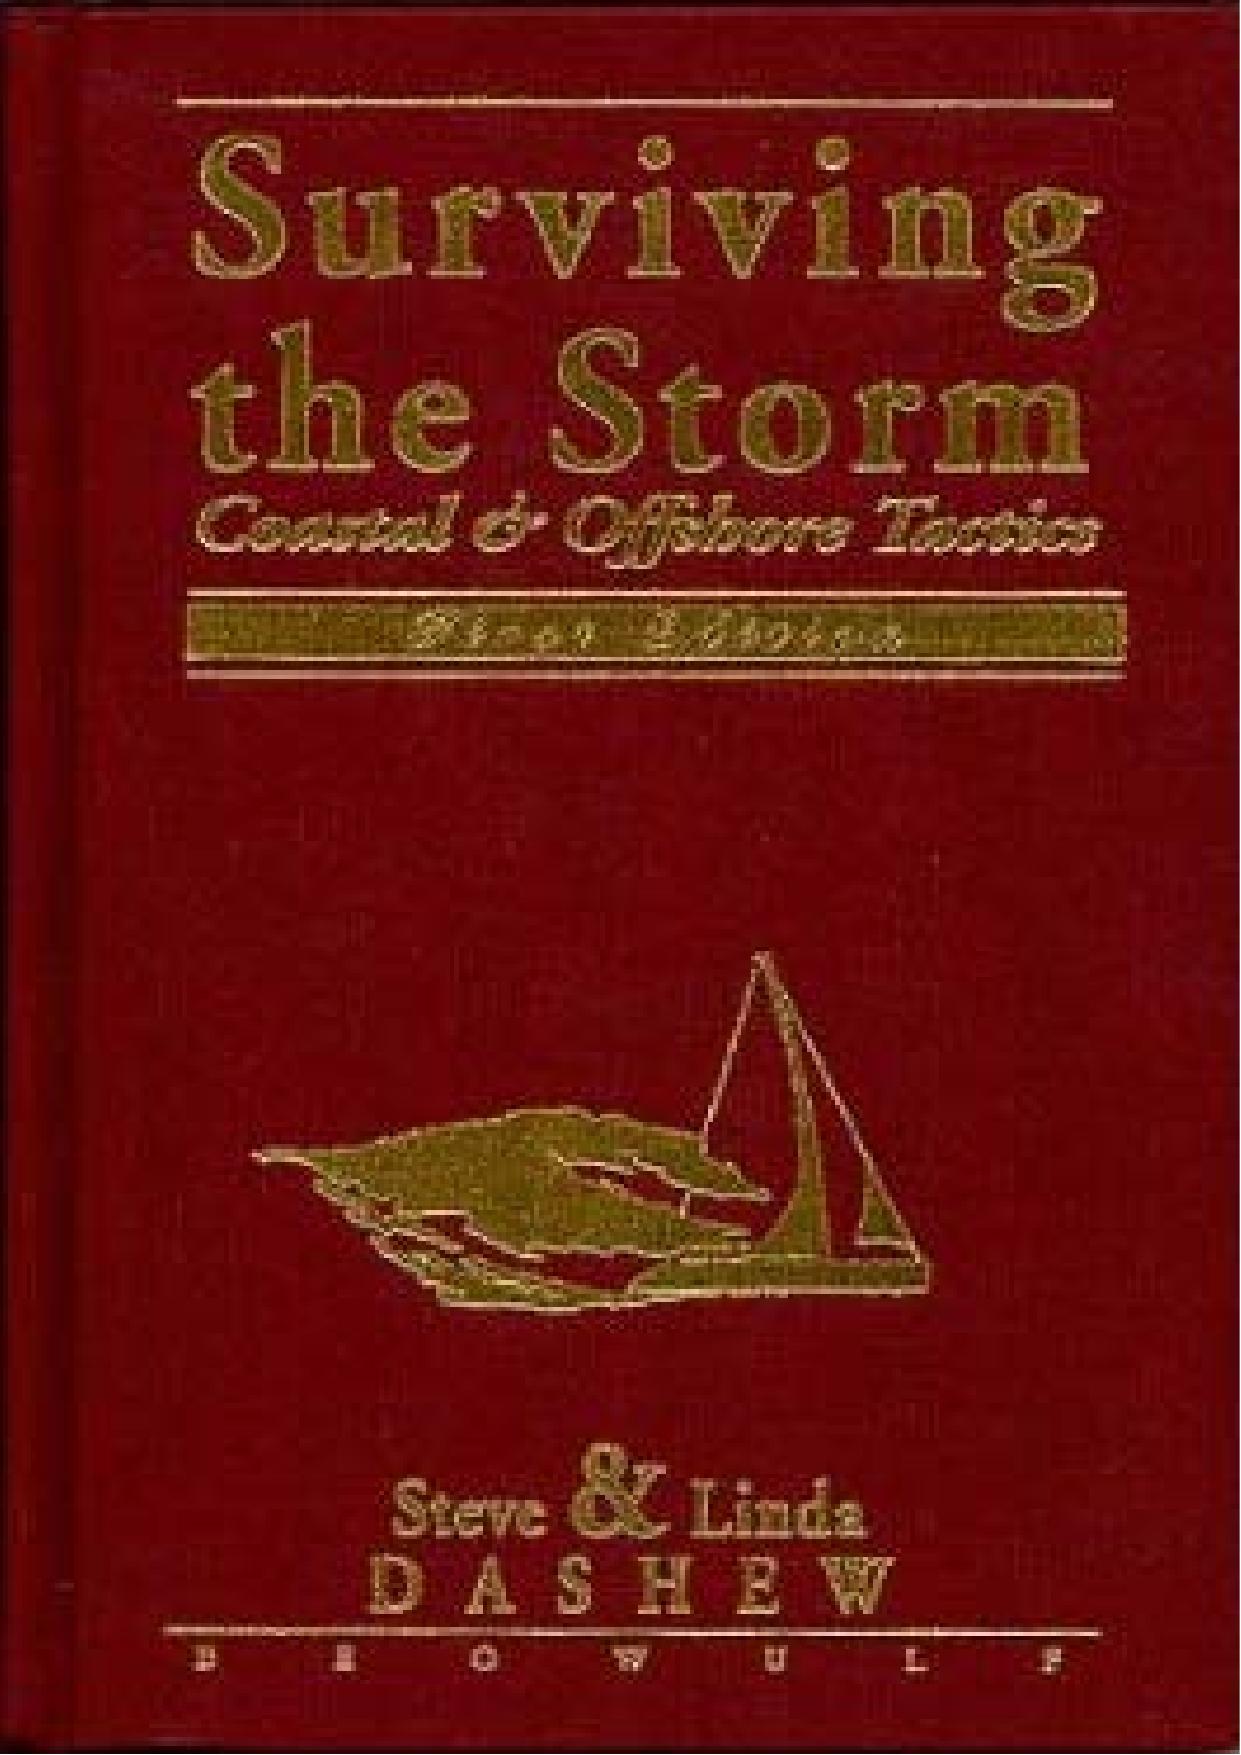 Surviving the Storm. Coastal and Offshore Tactics. CD-Rom version